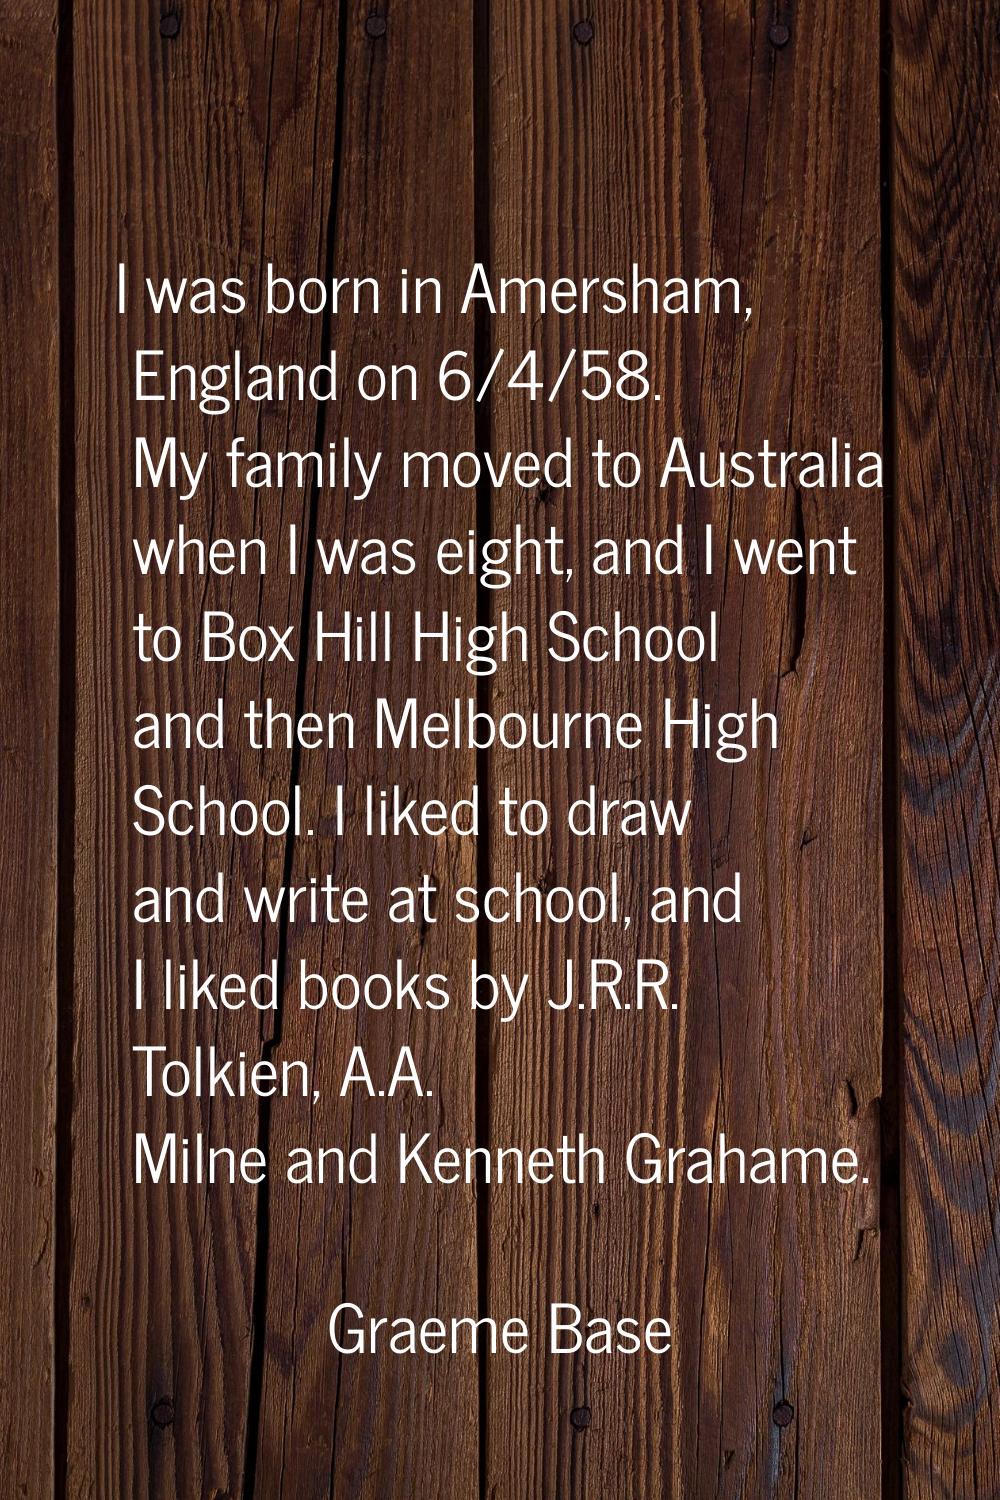 I was born in Amersham, England on 6/4/58. My family moved to Australia when I was eight, and I wen